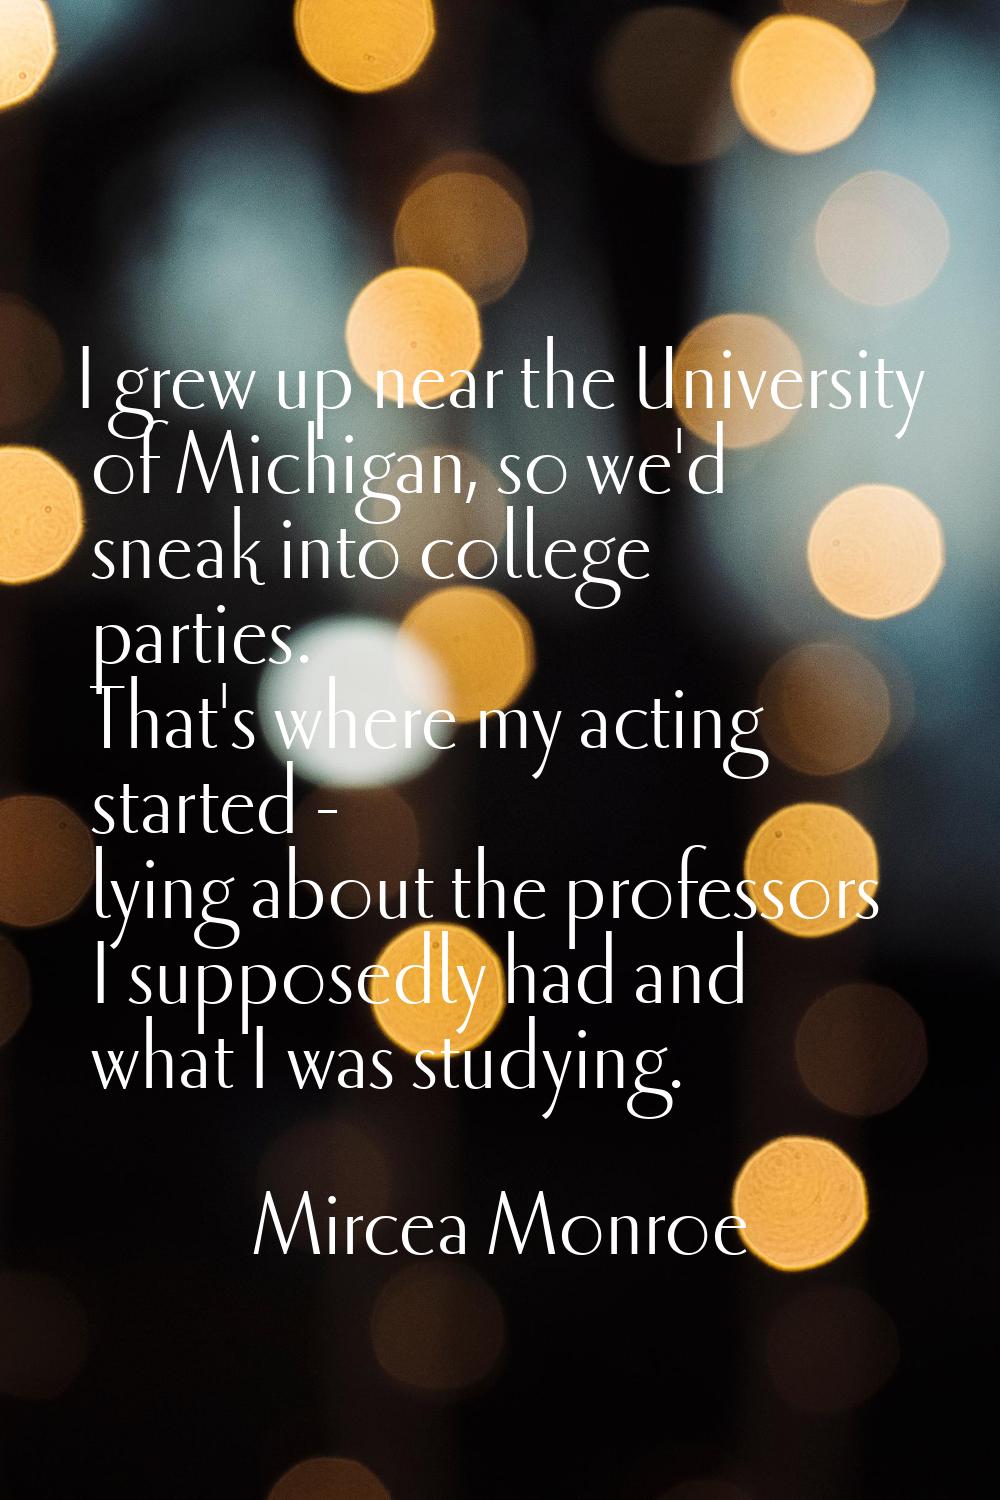 I grew up near the University of Michigan, so we'd sneak into college parties. That's where my acti